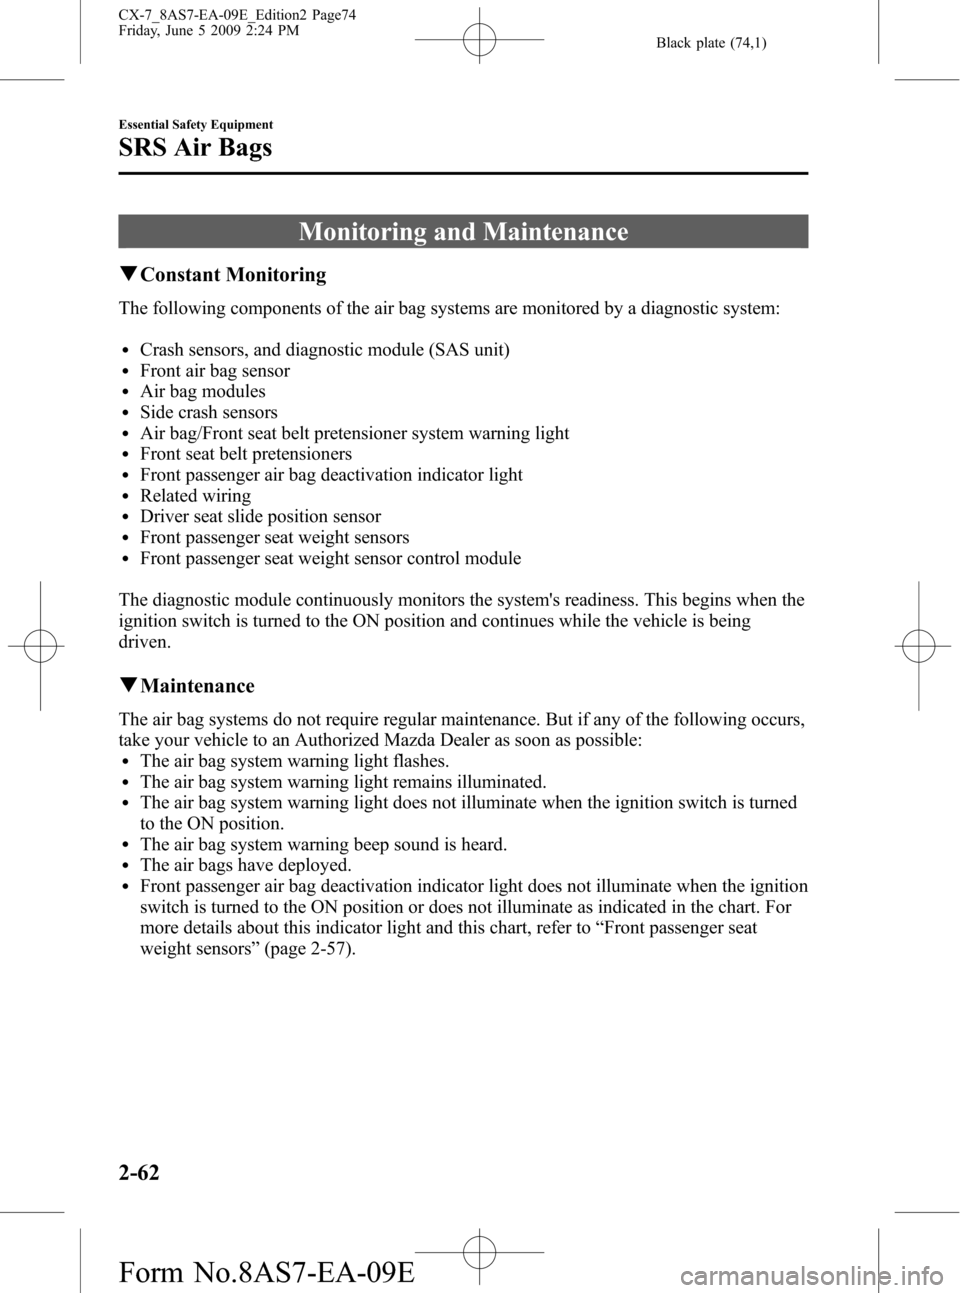 MAZDA MODEL CX-7 2010  Owners Manual (in English) Black plate (74,1)
Monitoring and Maintenance
qConstant Monitoring
The following components of the air bag systems are monitored by a diagnostic system:
lCrash sensors, and diagnostic module (SAS unit